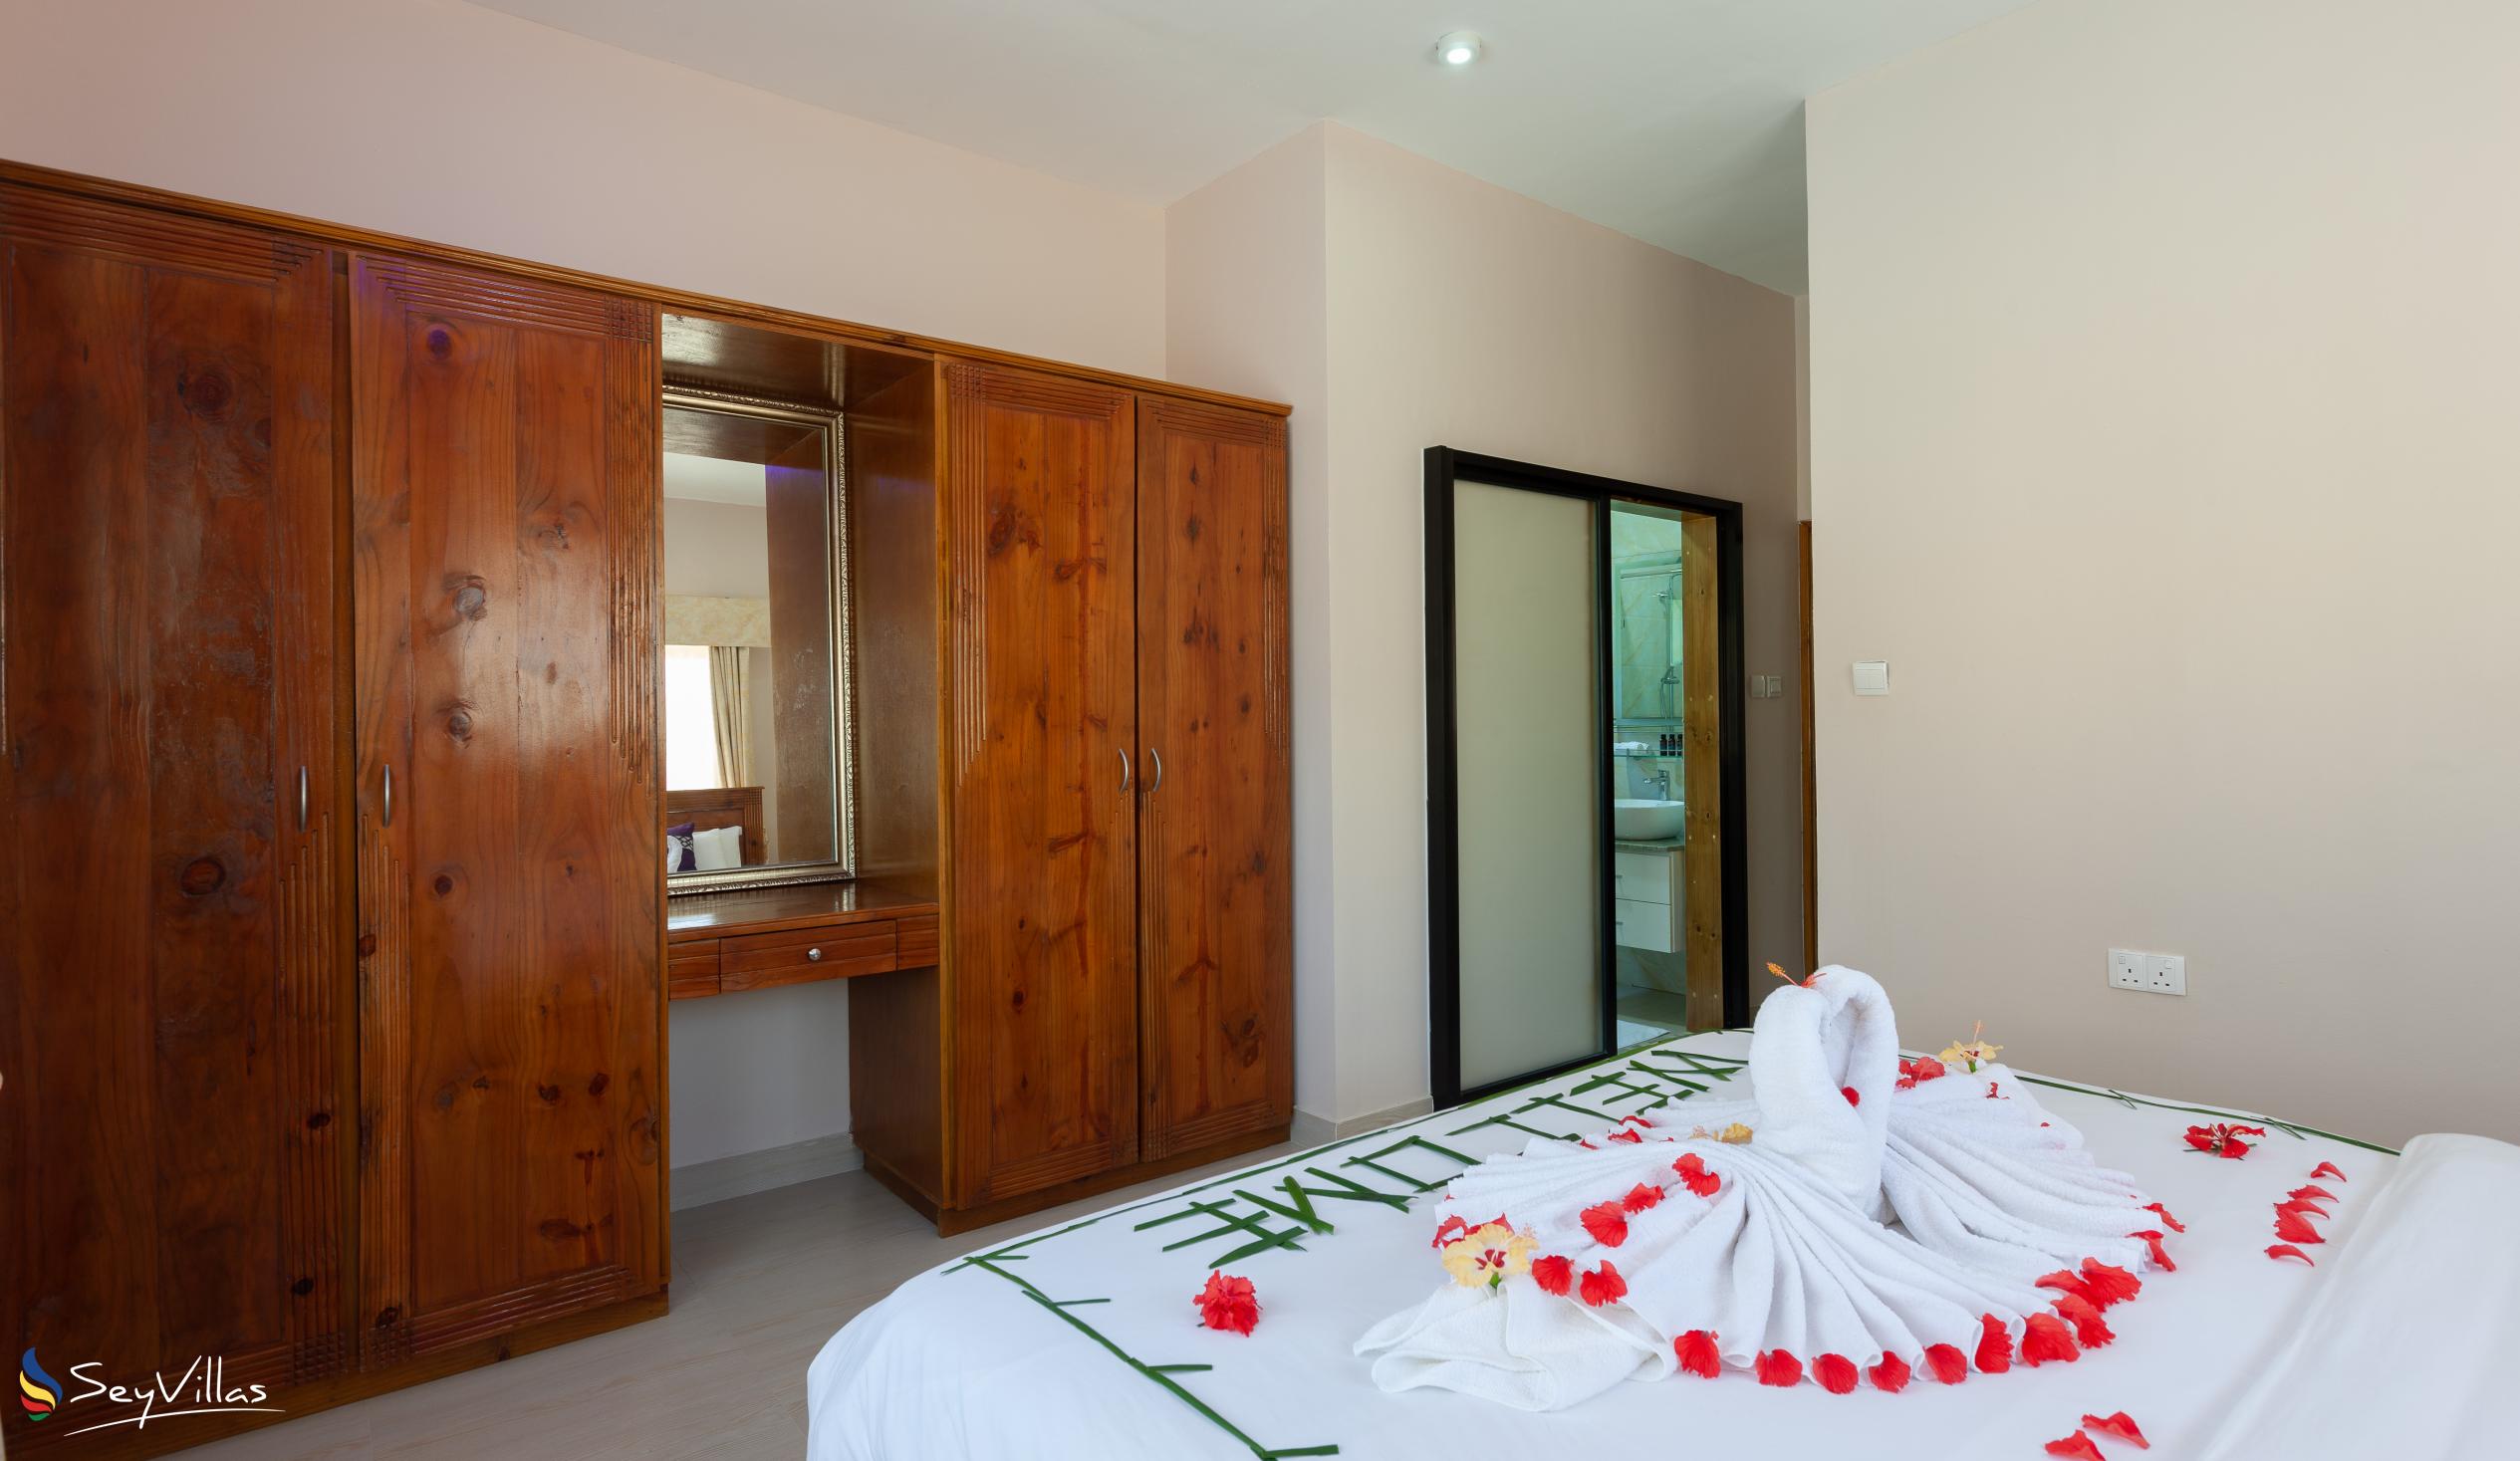 Foto 51: Stone Self Catering Apartments - Appartement 2 chambres - Praslin (Seychelles)